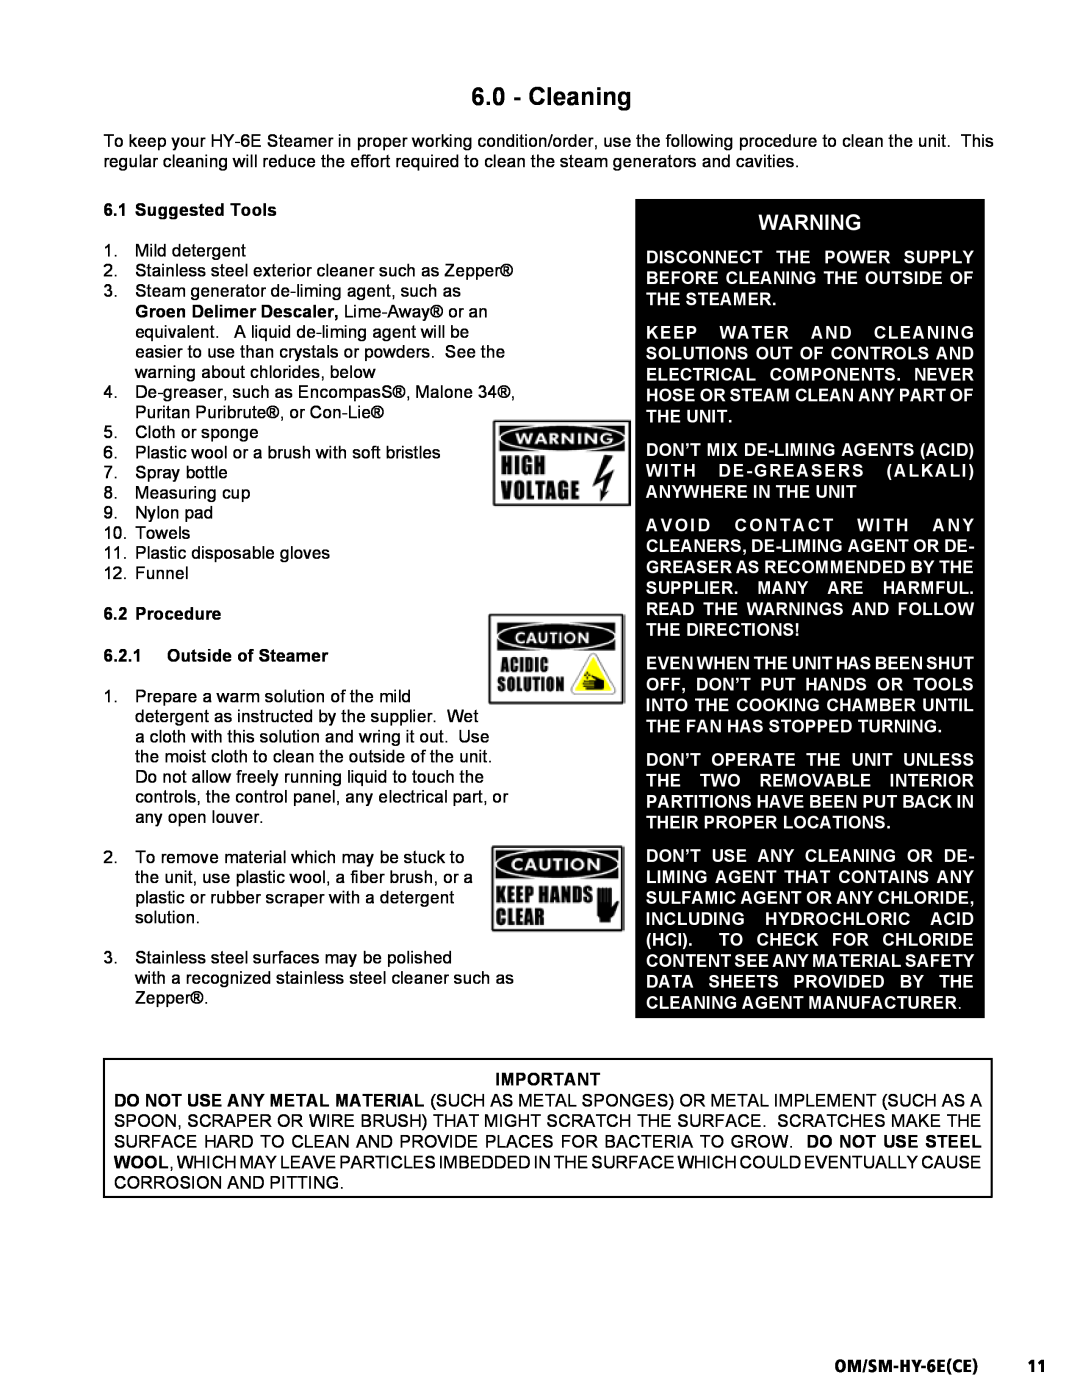 Unified Brands HY-6E(CE) service manual Cleaning, Suggested Tools, Procedure 6.2.1Outside of Steamer, OM/SM-HY-6ECE11 